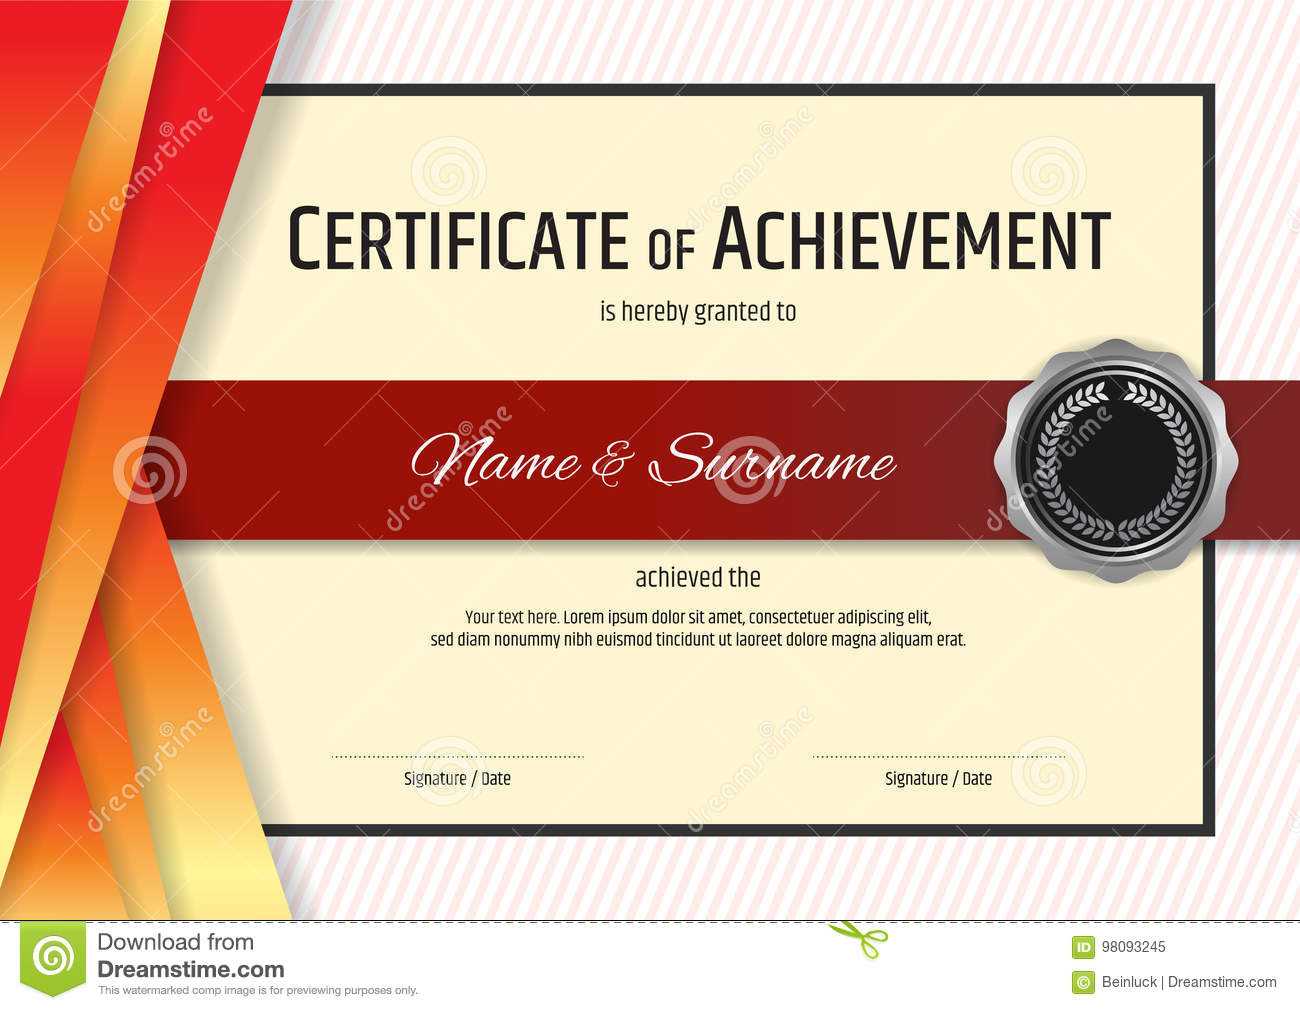 Luxury Certificate Template With Elegant Border Frame With Regard To Elegant Certificate Templates Free